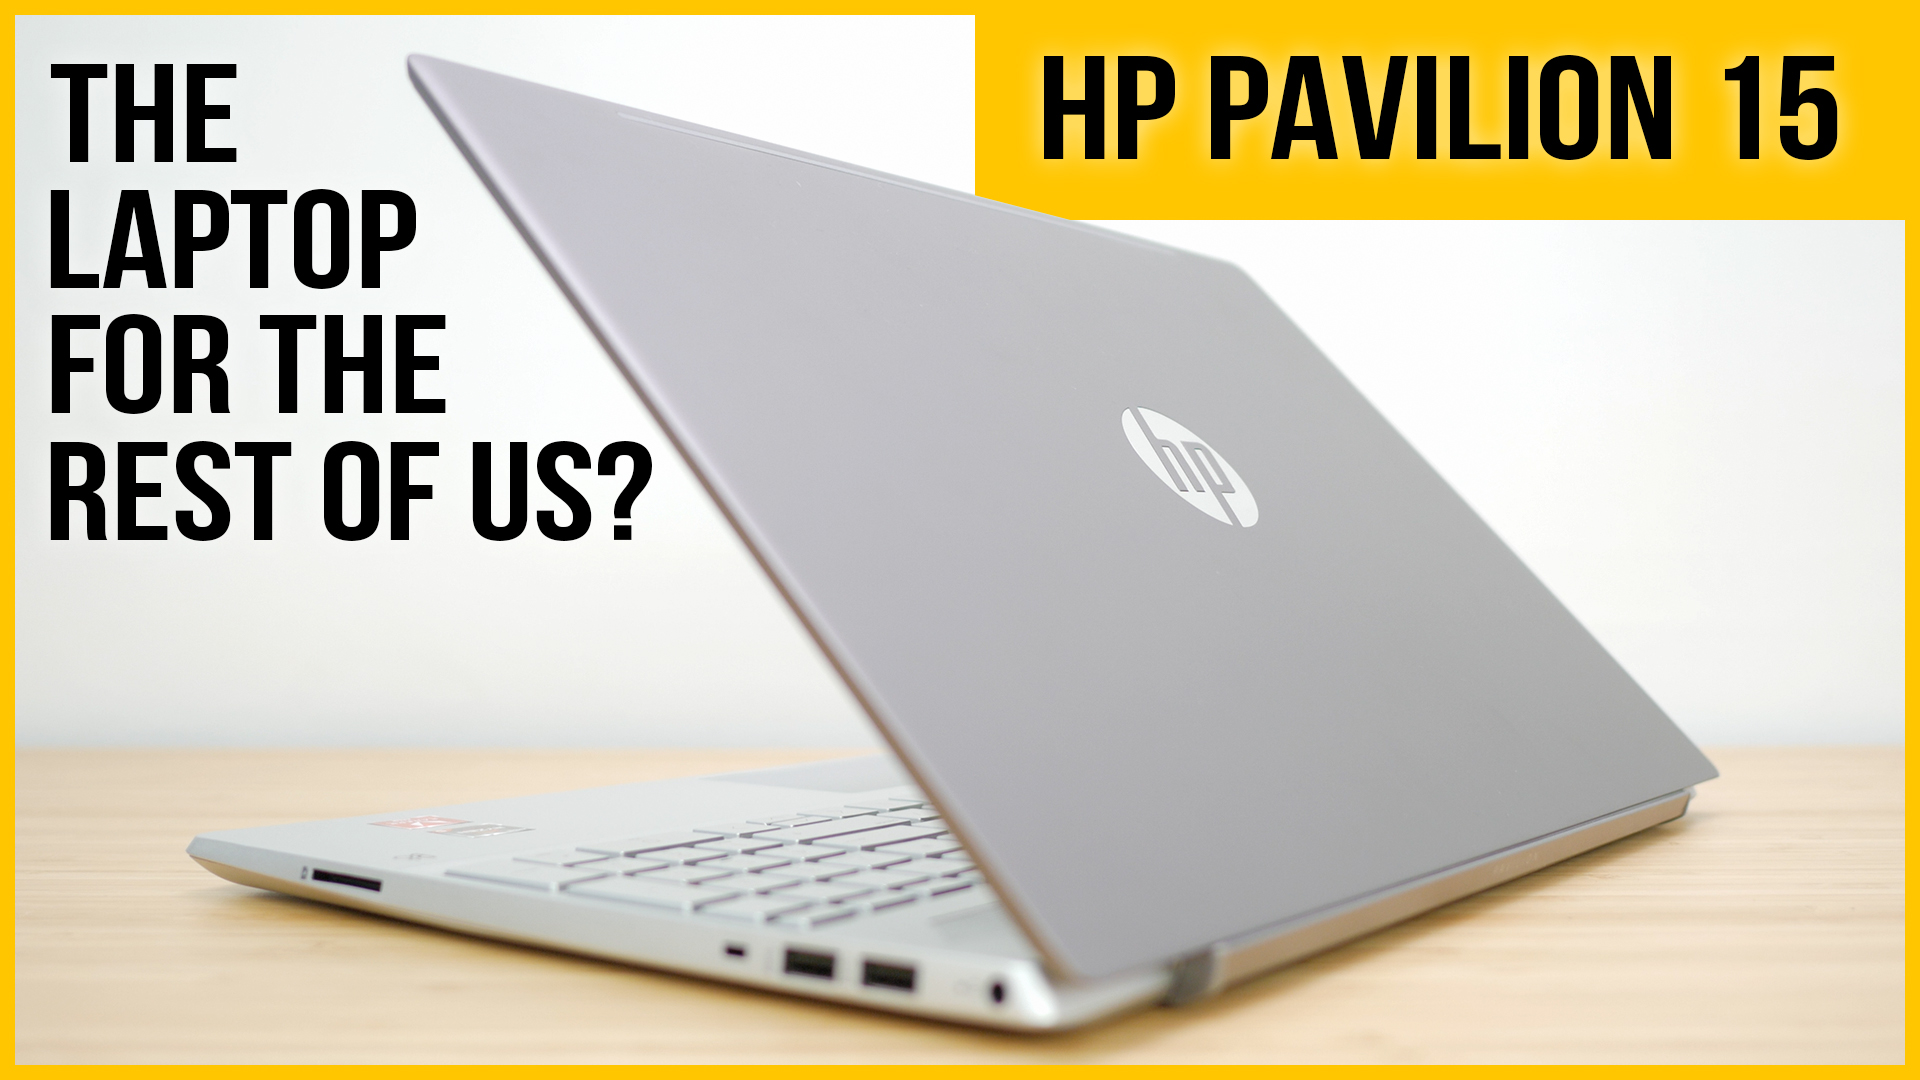 Zuiver solo boekje HP Pavilion 15 review | The perfect student or all-round laptop?